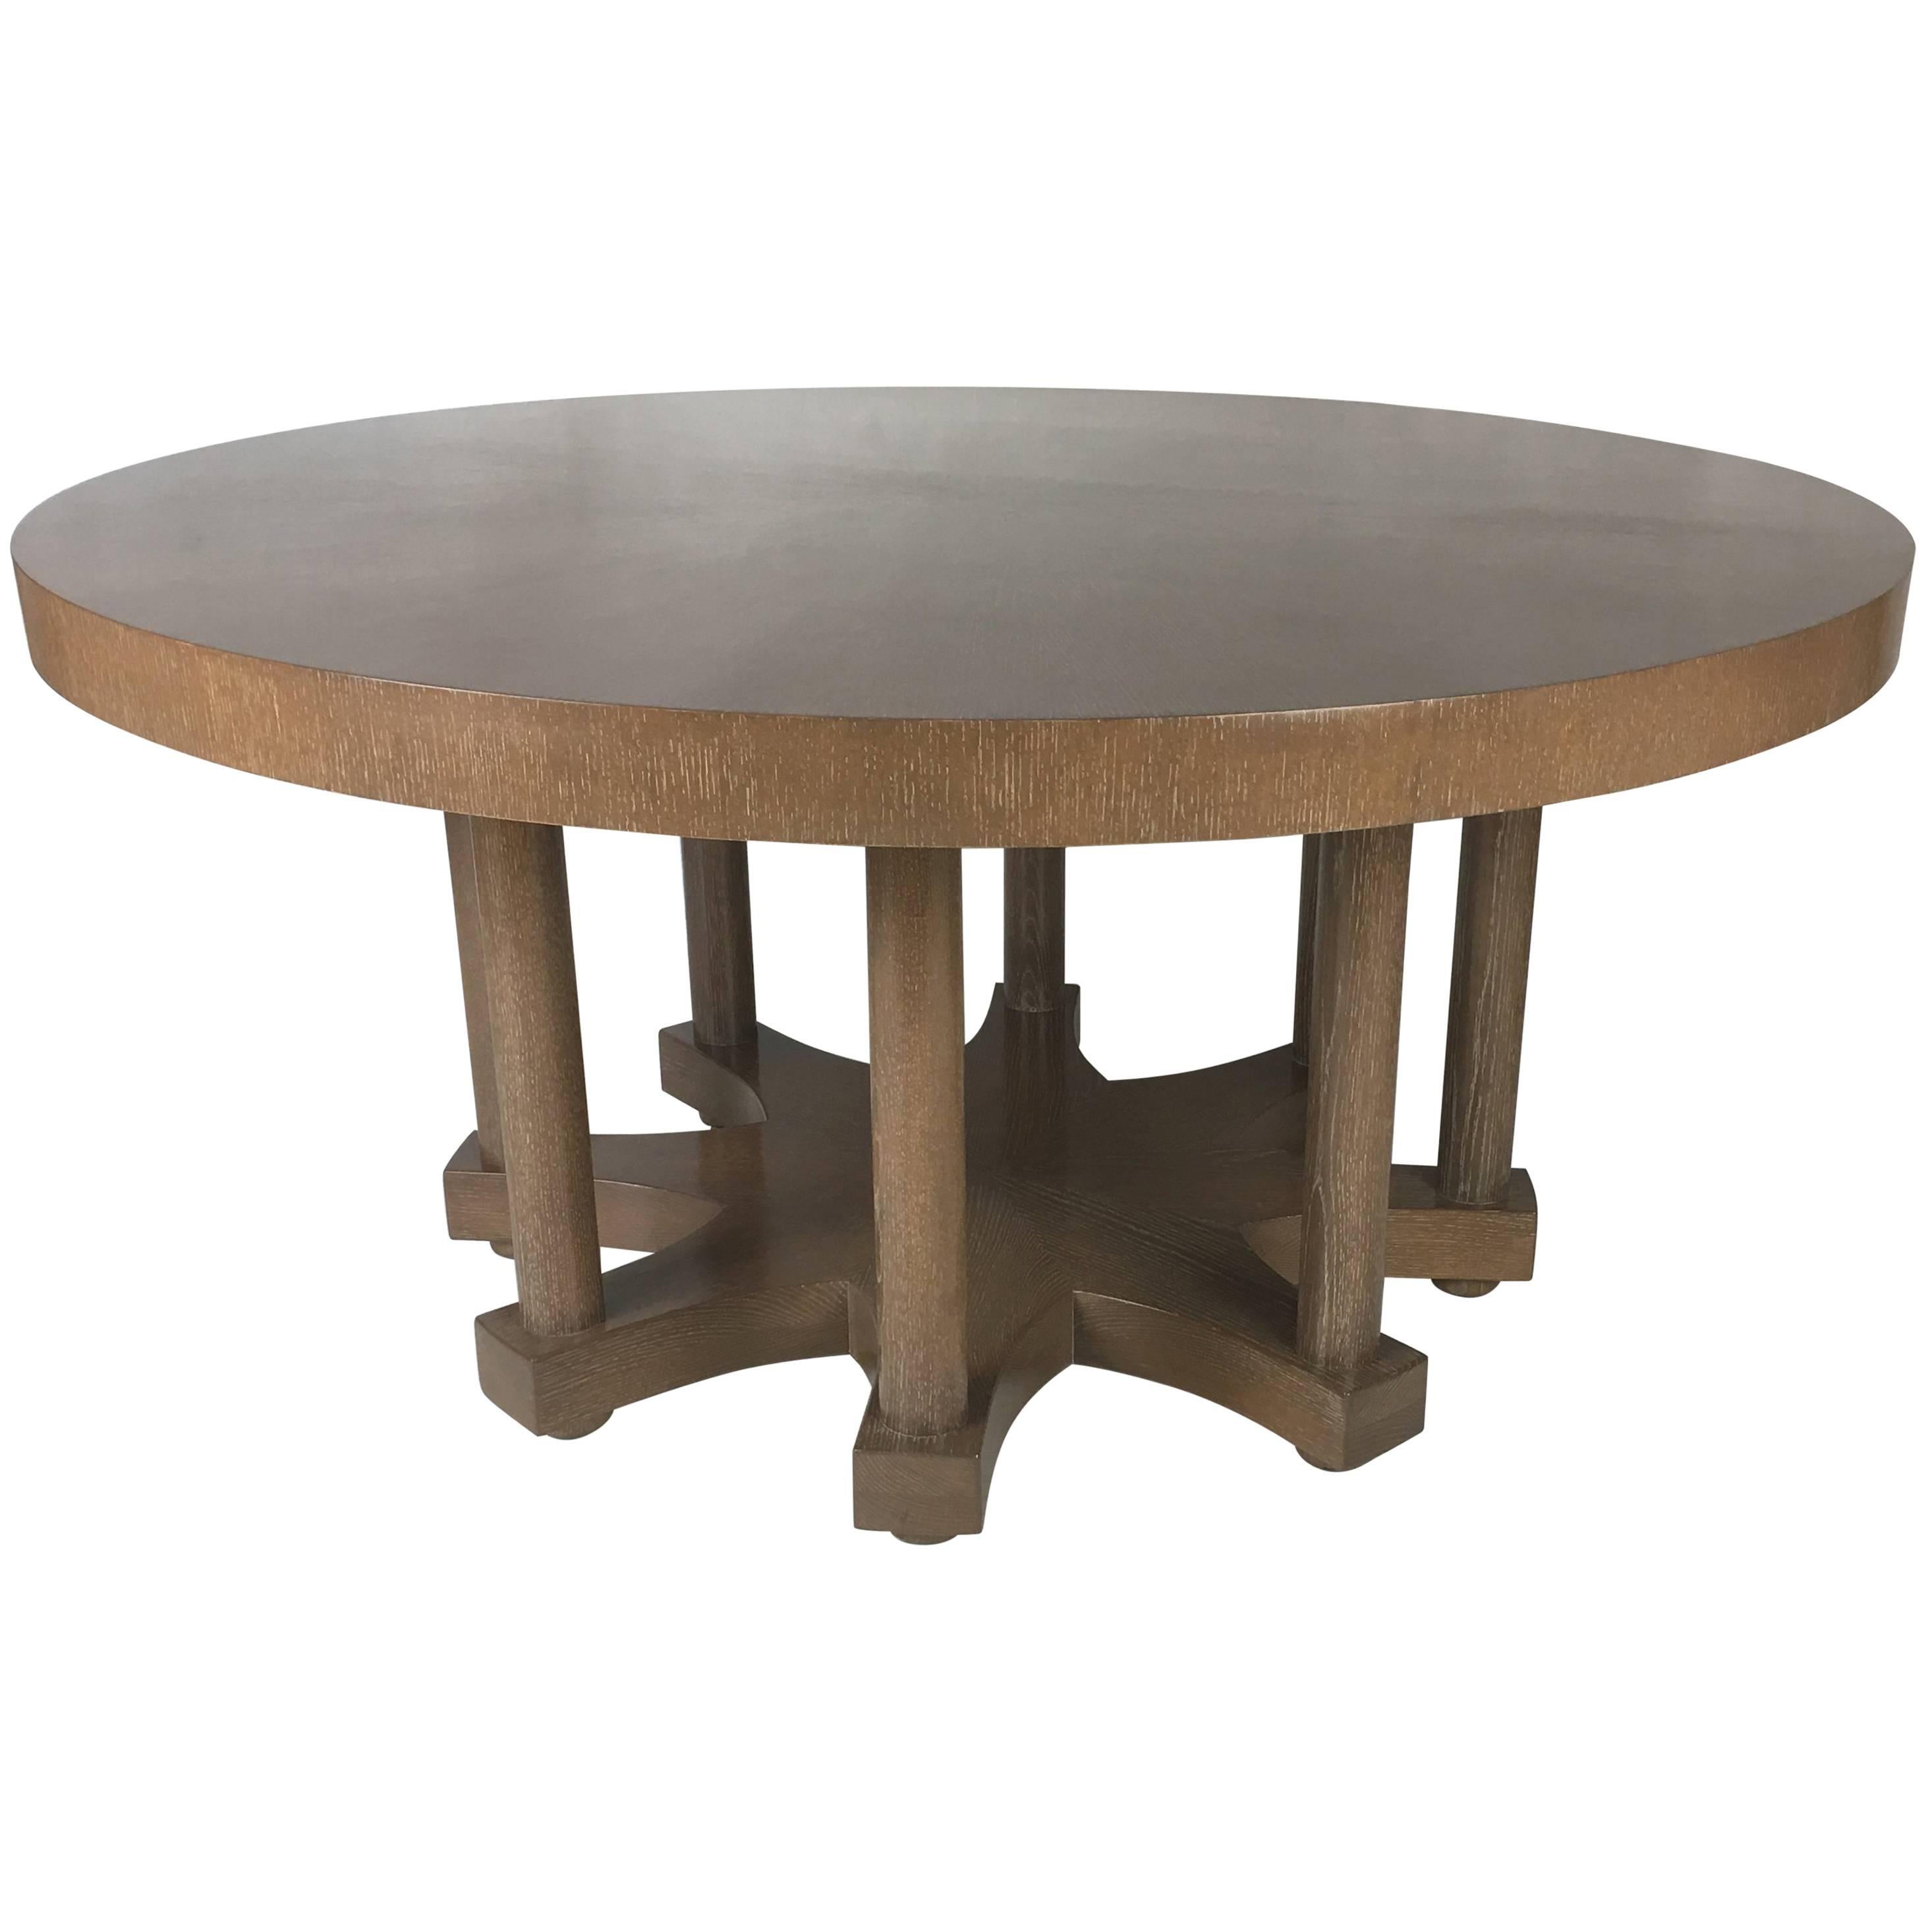 Round Colonnade Base Oak Dining Table